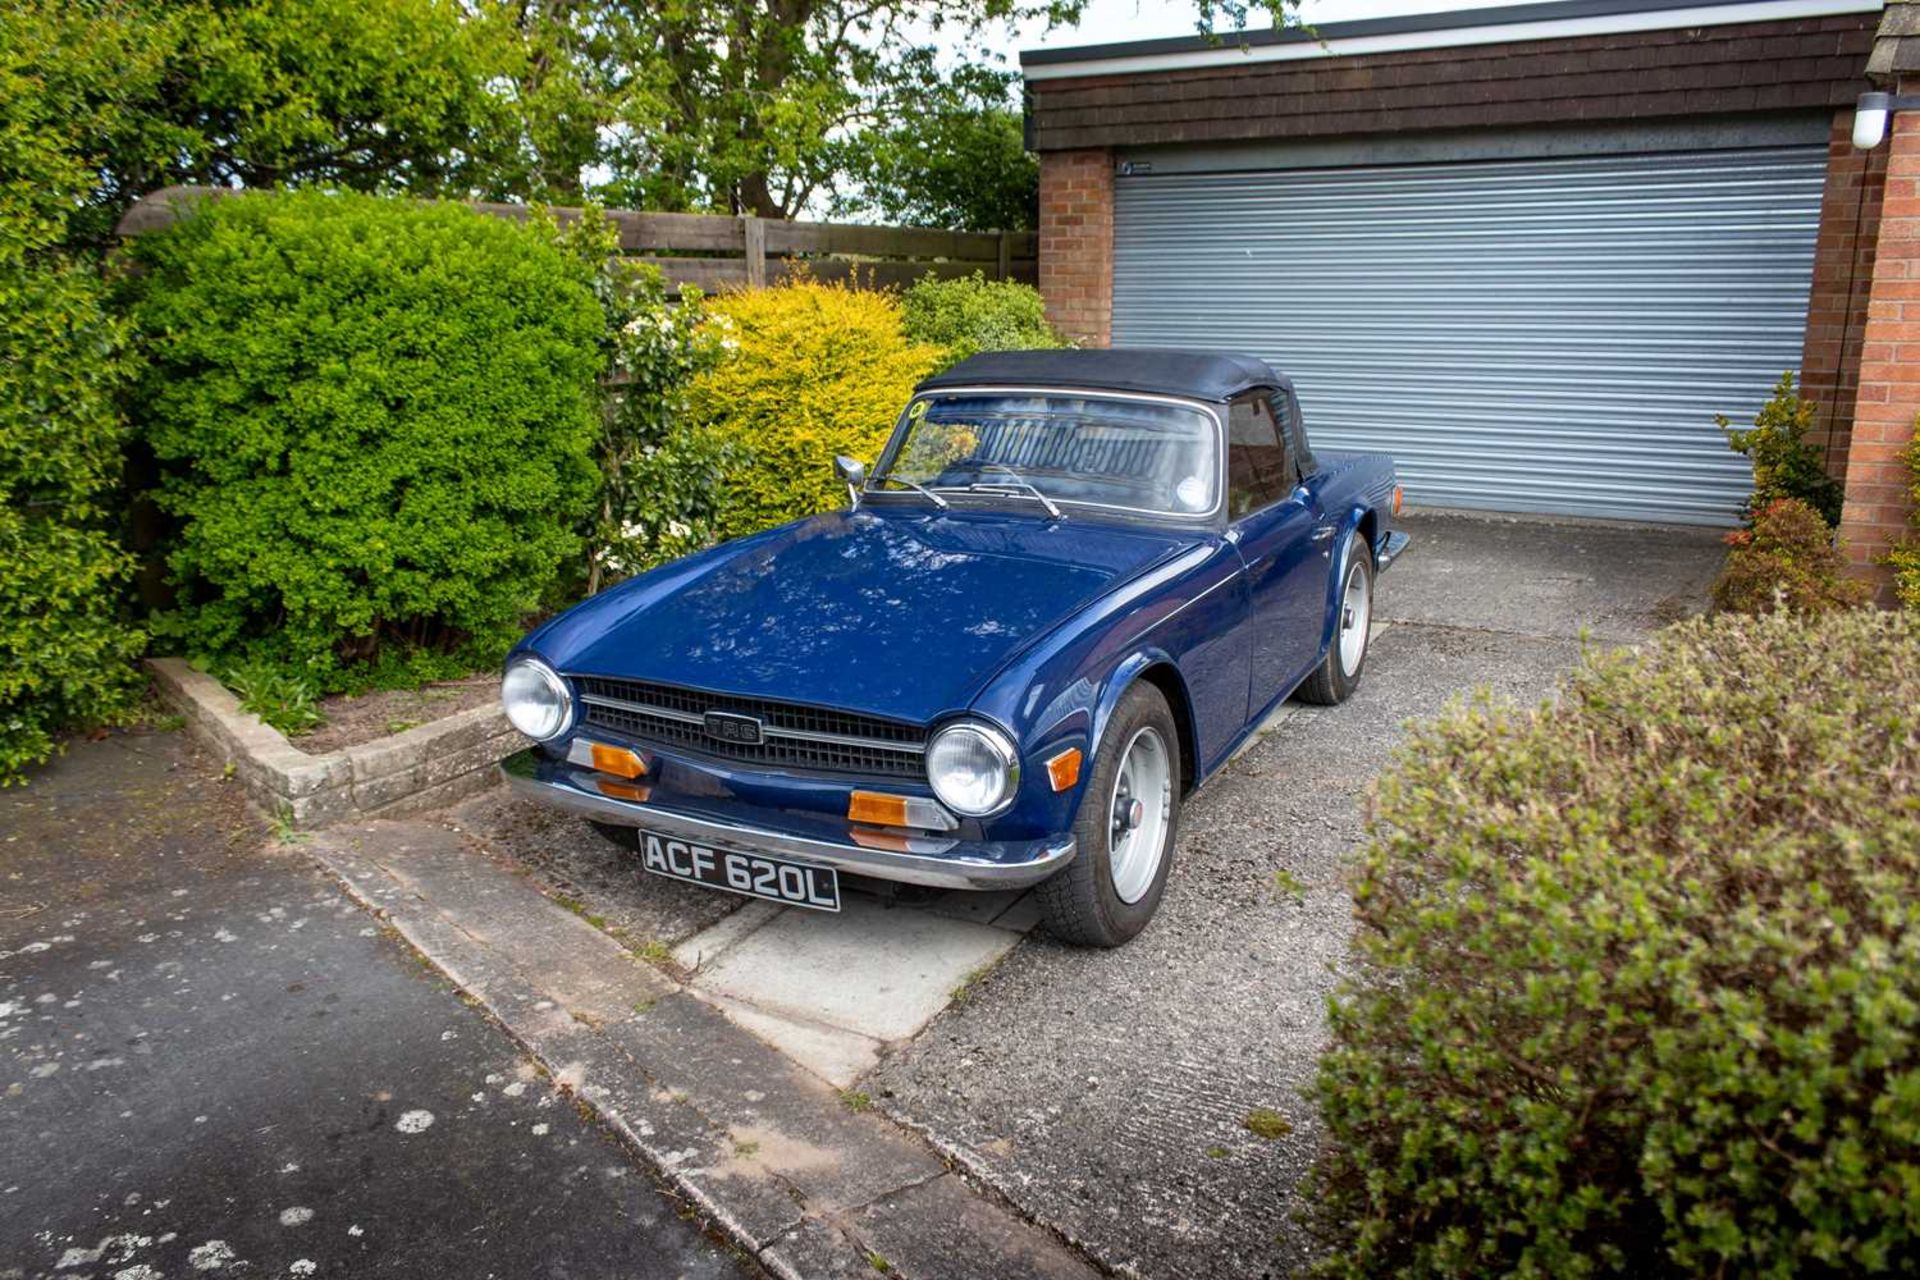 1972 Triumph TR6 Home market example, specified with manual overdrive transmission - Image 7 of 95